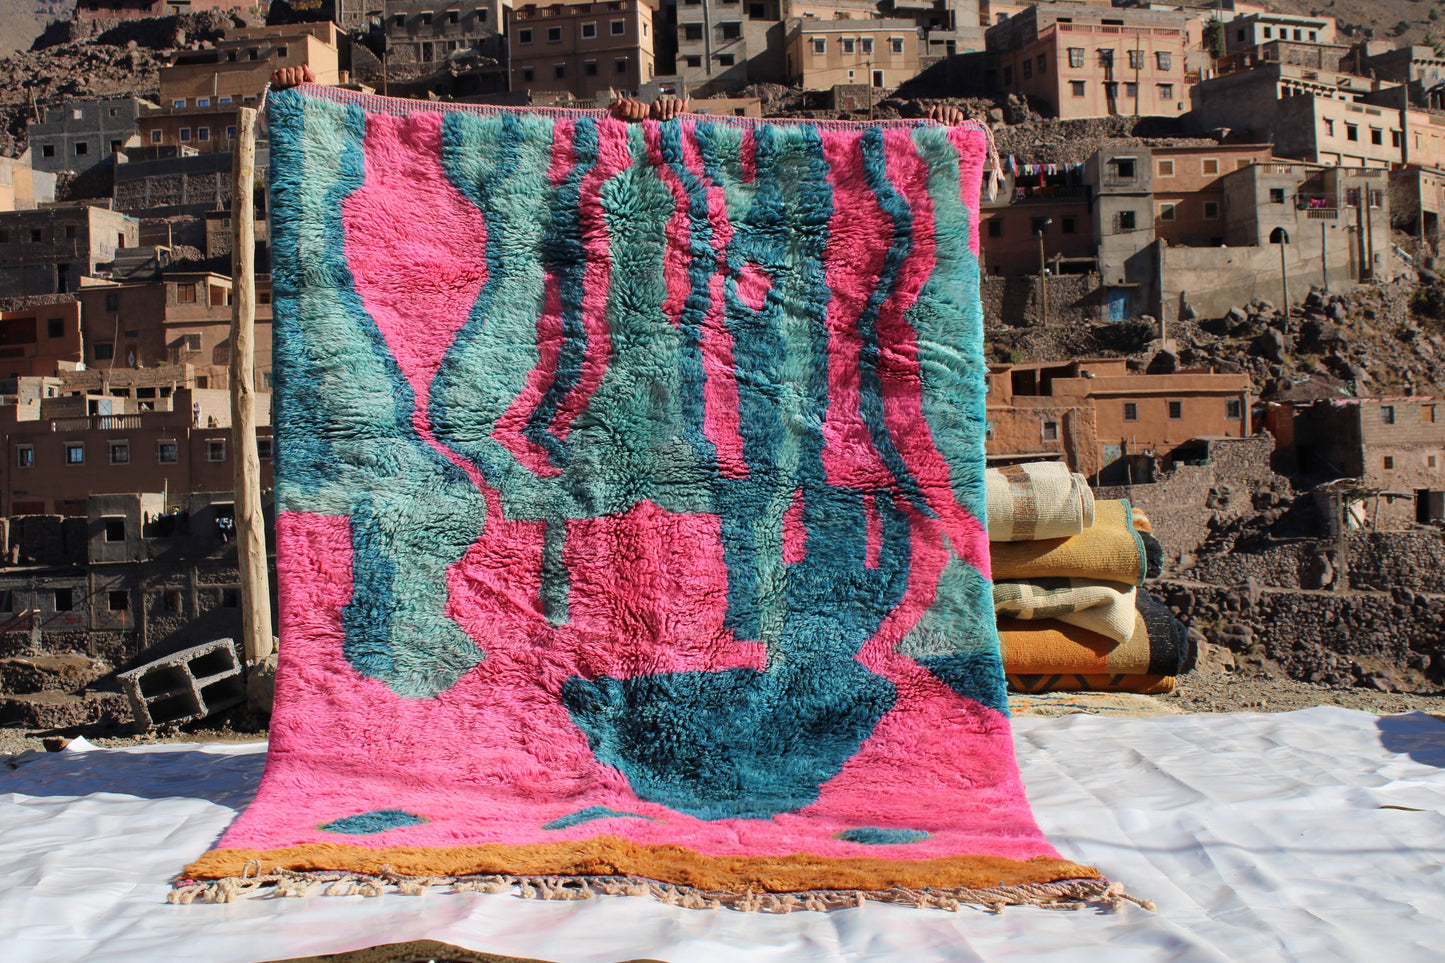 Beni Ourain rugs originate from the Atlas Mountains of Morocco and are characterized by their distinctive, neutral-toned, and geometric designs. These handwoven rugs often feature a plush pile and are made by the Berber tribes,  size is 263x177 cm